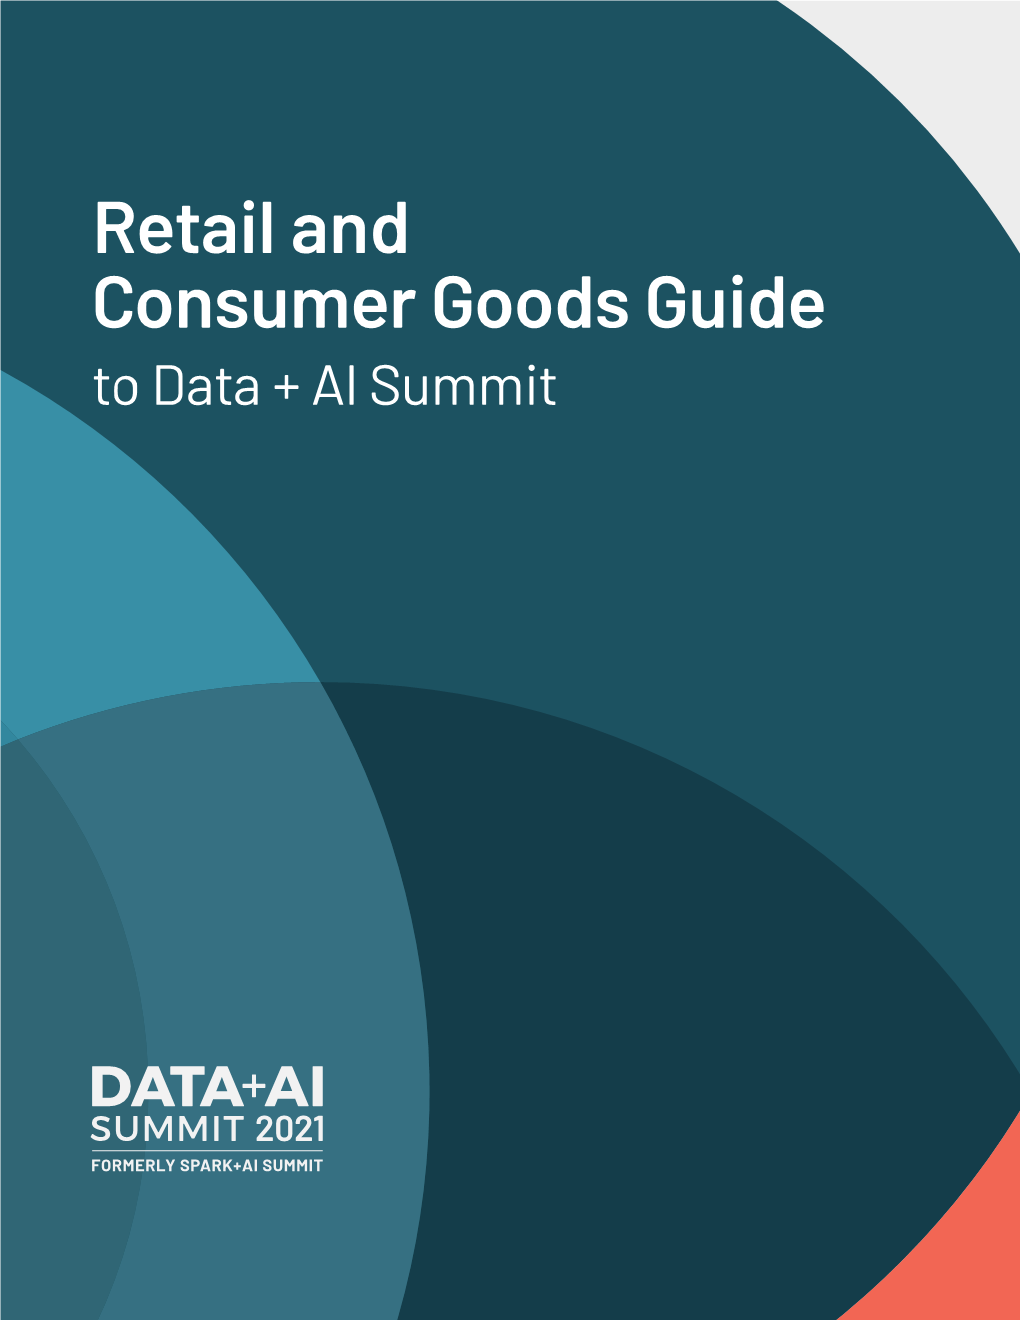 Retail and Consumer Goods Guide to Data + AI Summit Open Your World to Data + AI